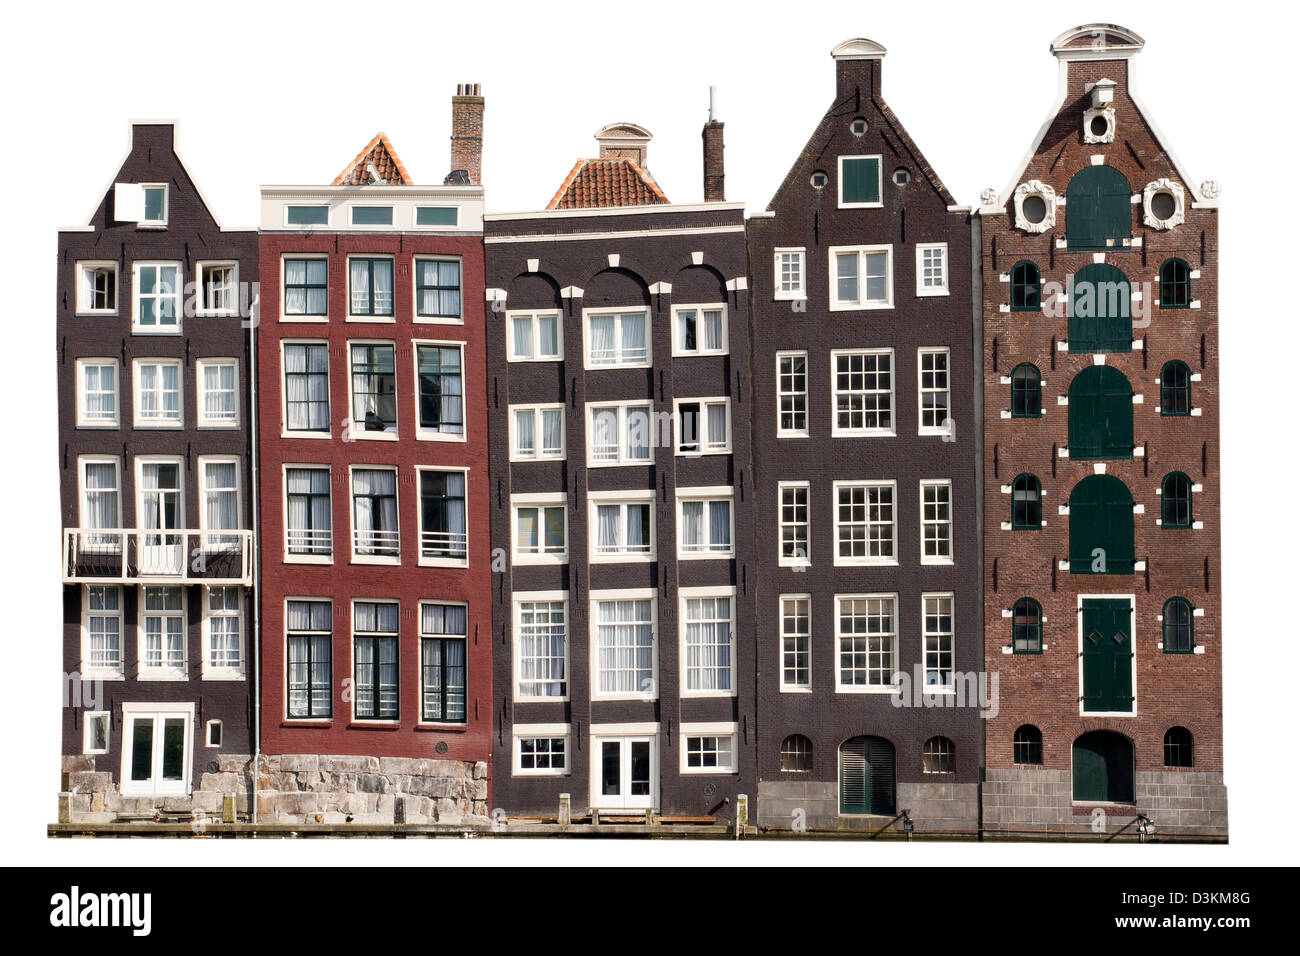 Amsterdam canal houses - Isolated Stock Photo